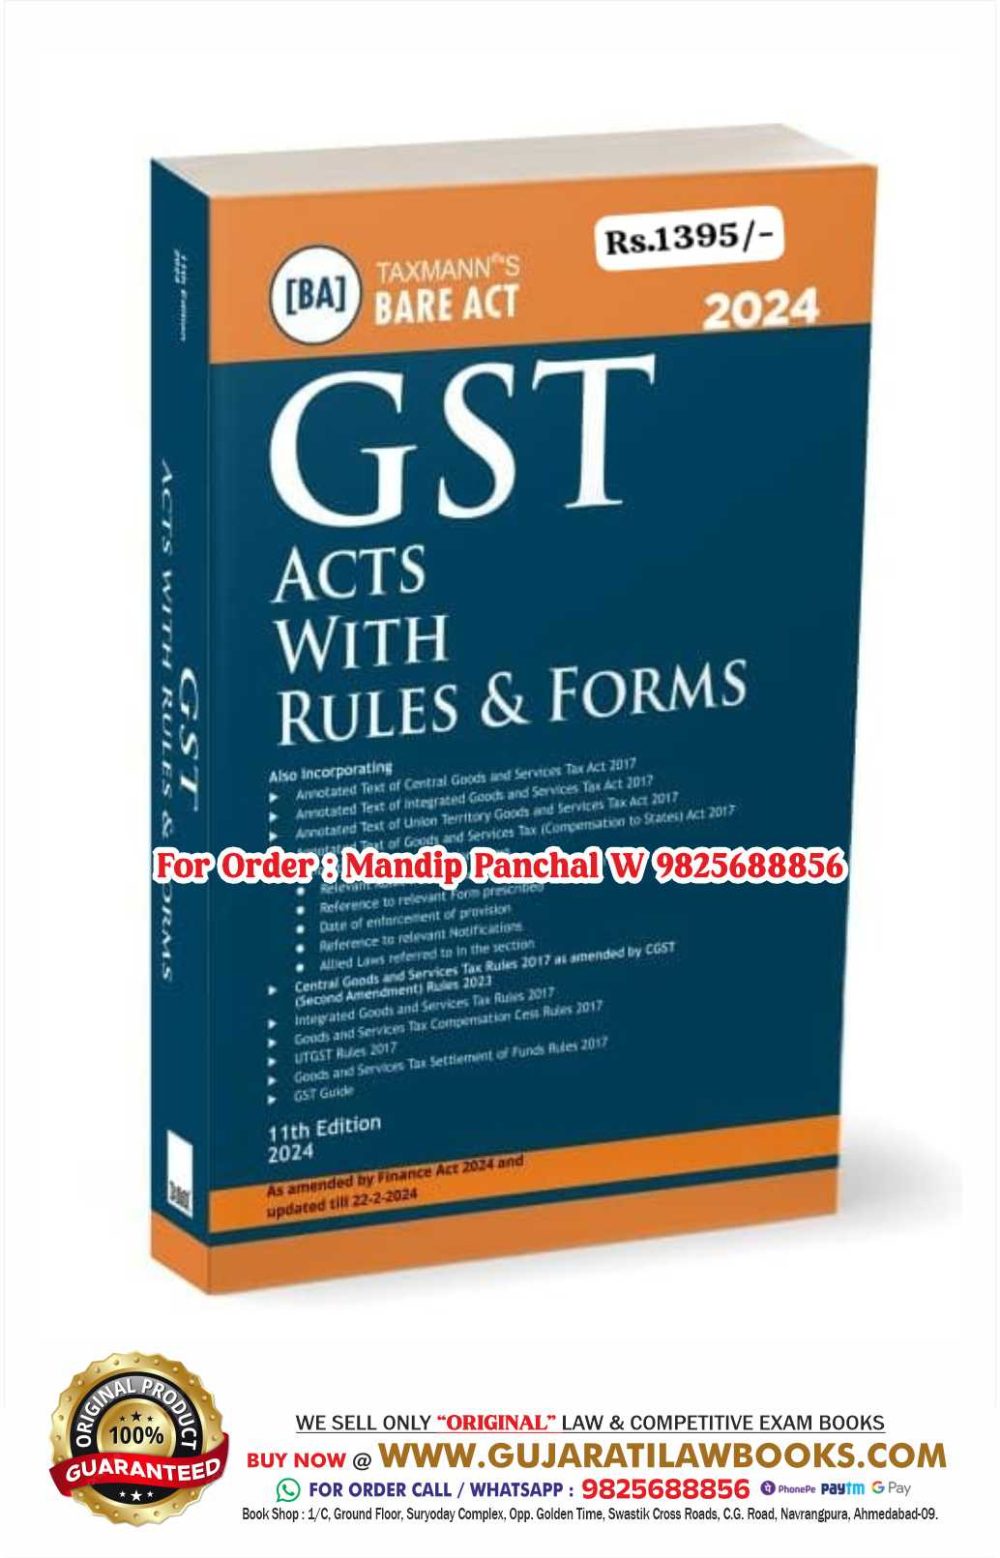 GST Acts with Rules & Forms - BARE ACT - Latest 11th Edition March 2024 Taxmann